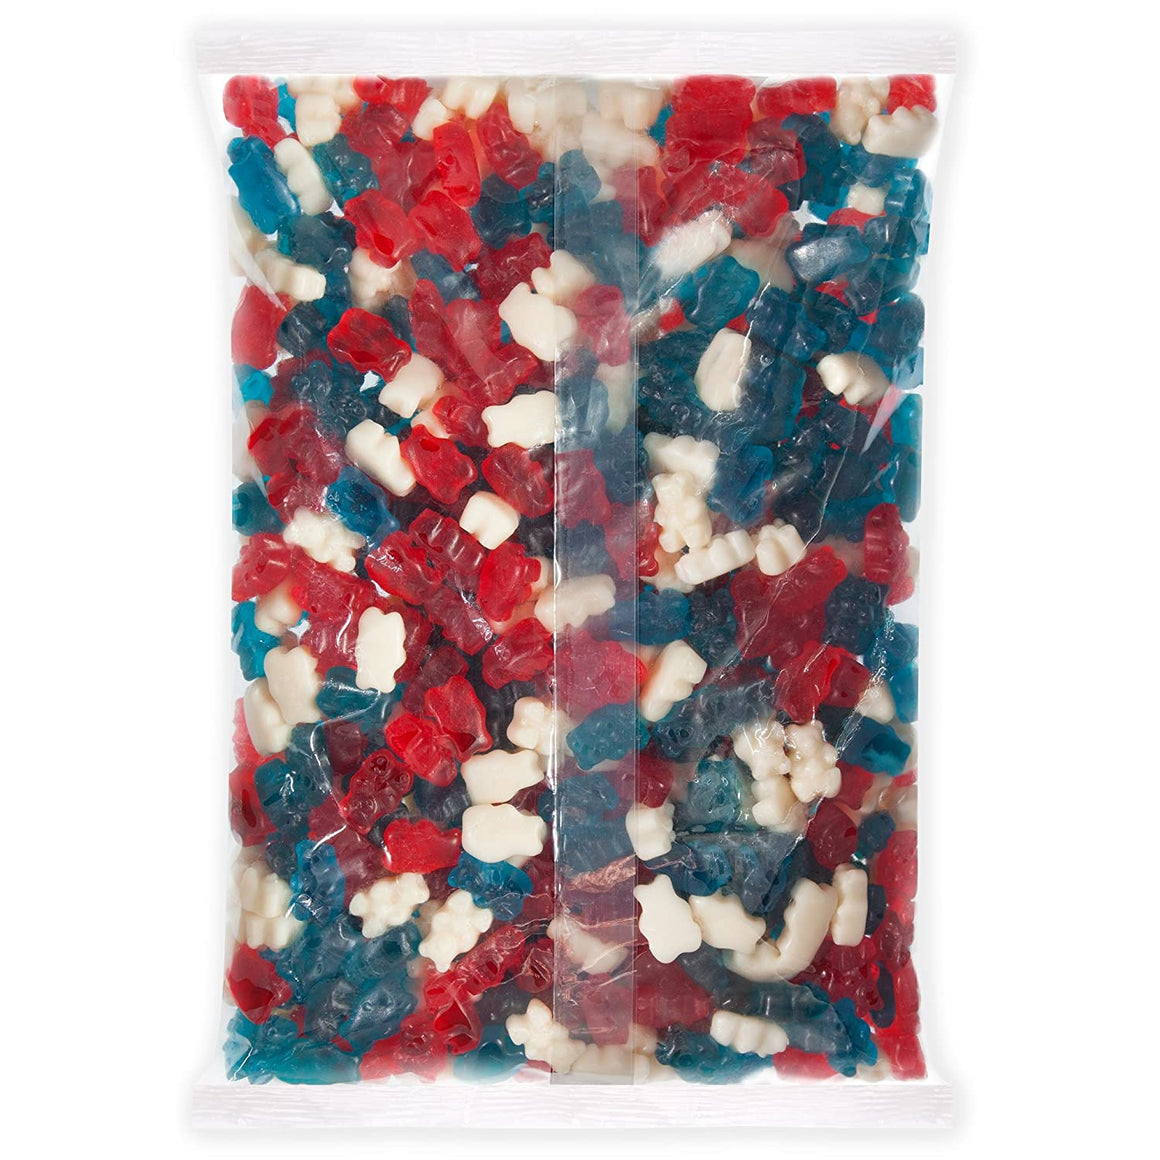 All City Candy Red, White & Blue Freedom Gummi Bears Bulk Bags  Albanese Confectionery For fresh candy and great service, visit www.allcitycandy.com